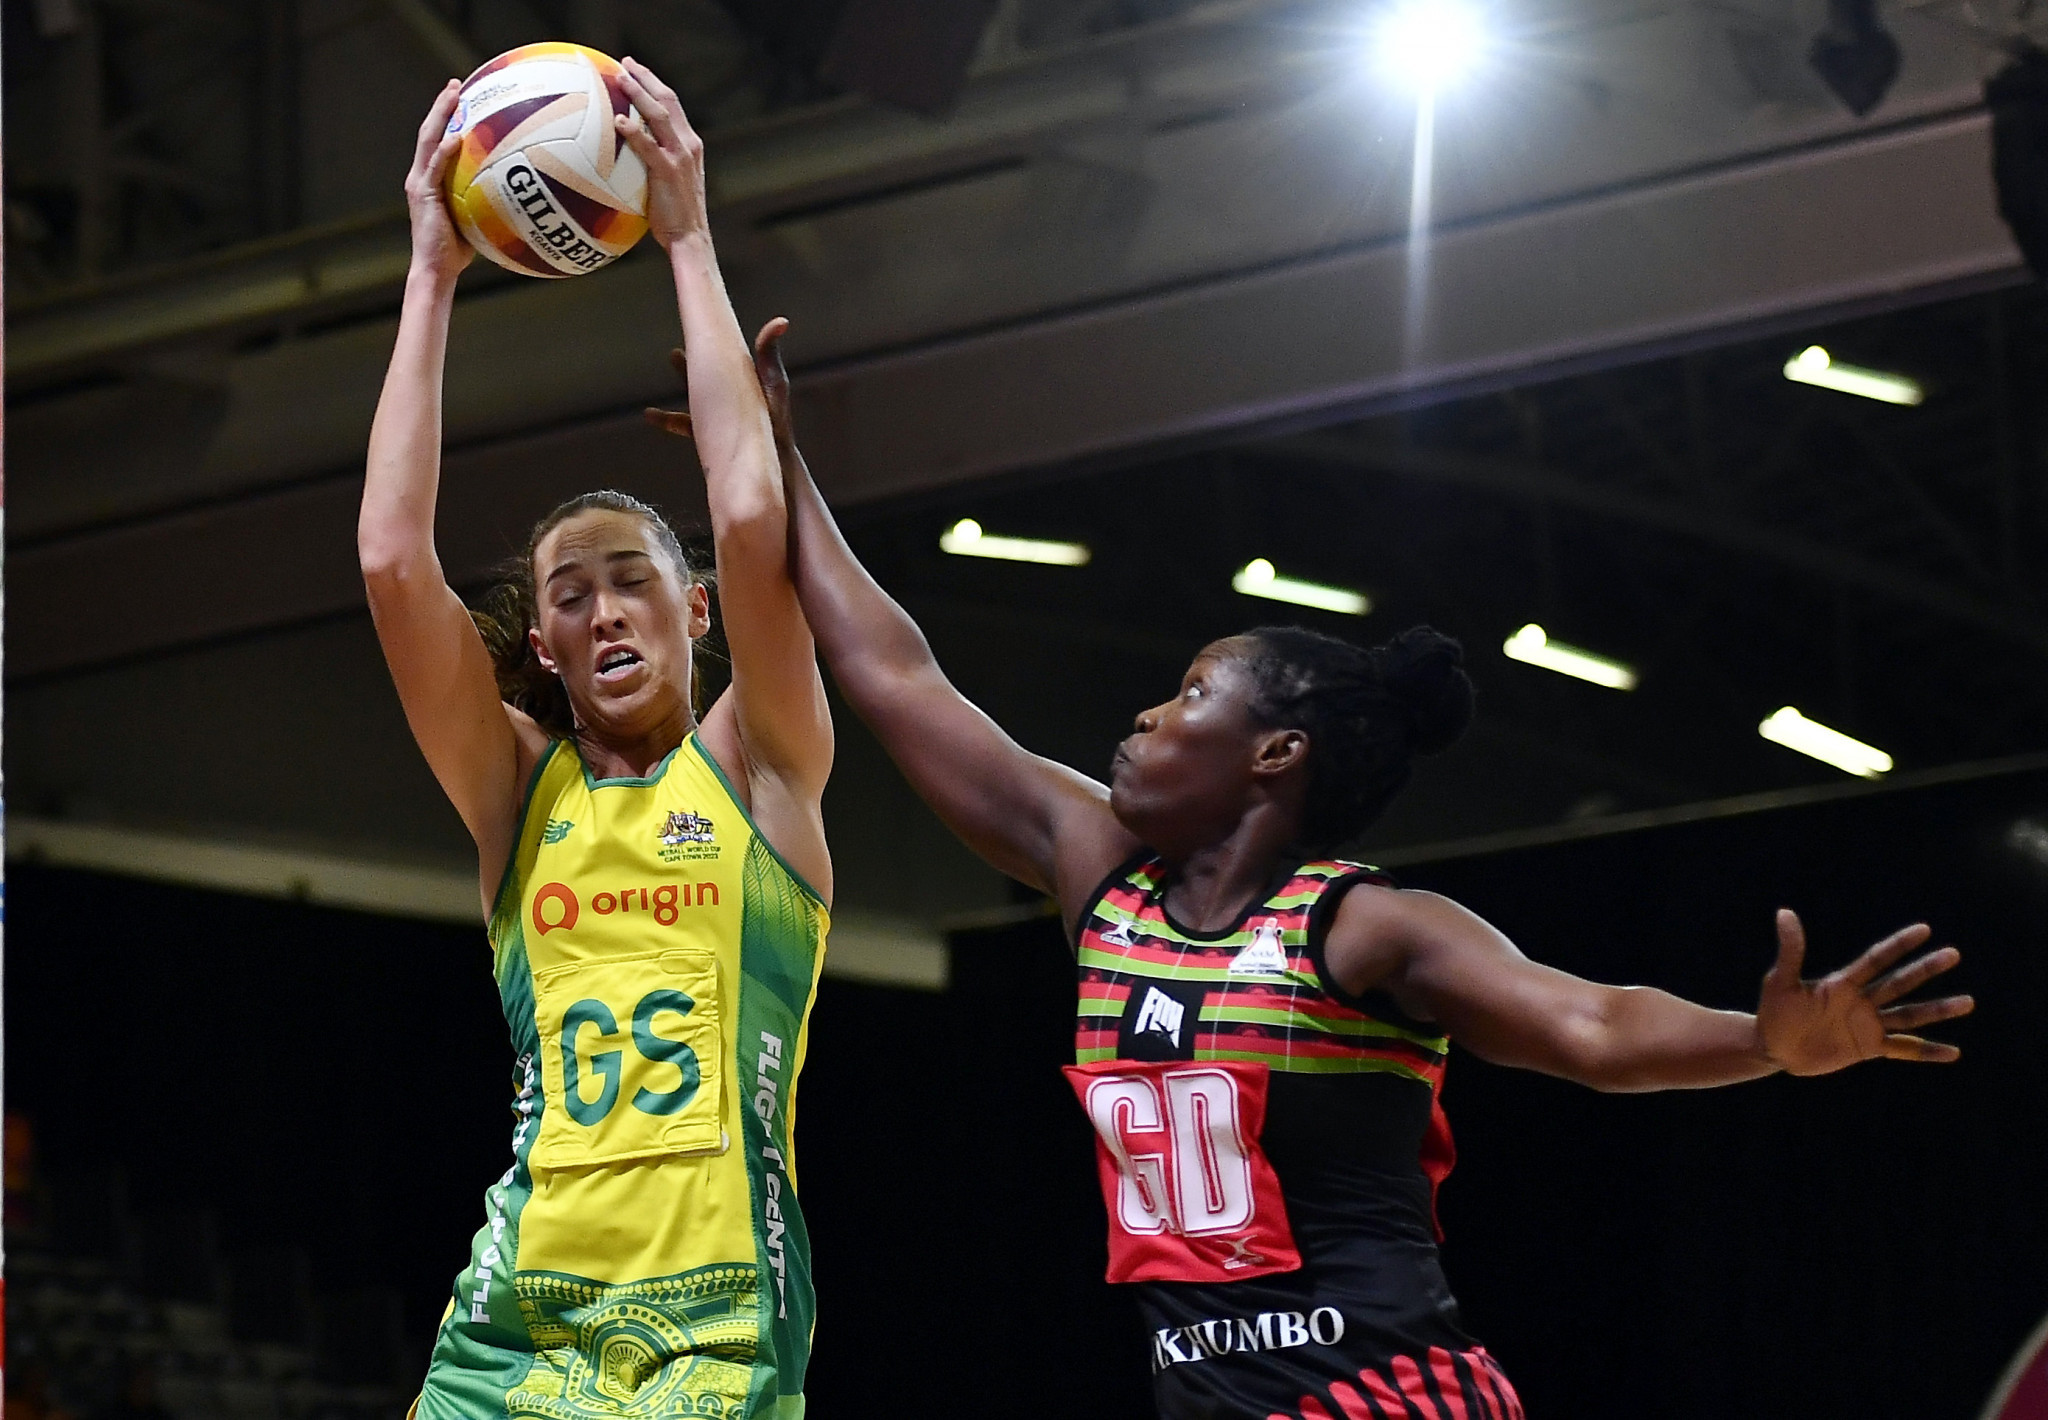 Australia avoid Malawi scare at Netball World Cup in Cape Town